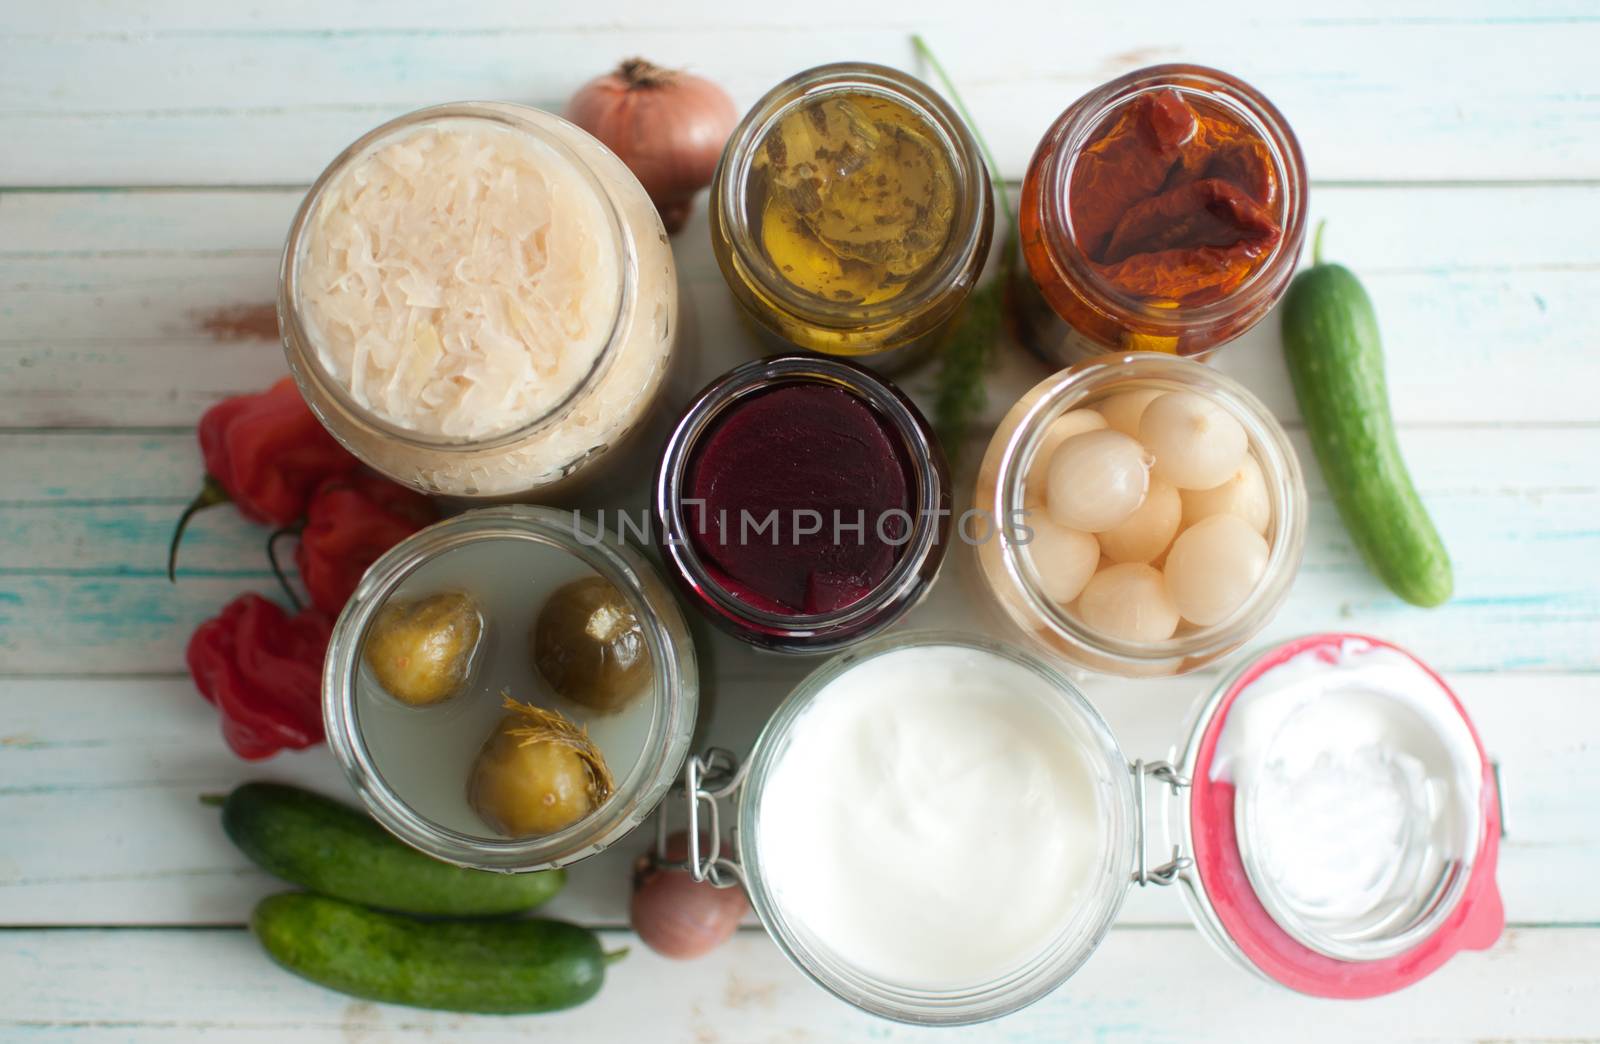 View of open jars with naturally fermented ingredients